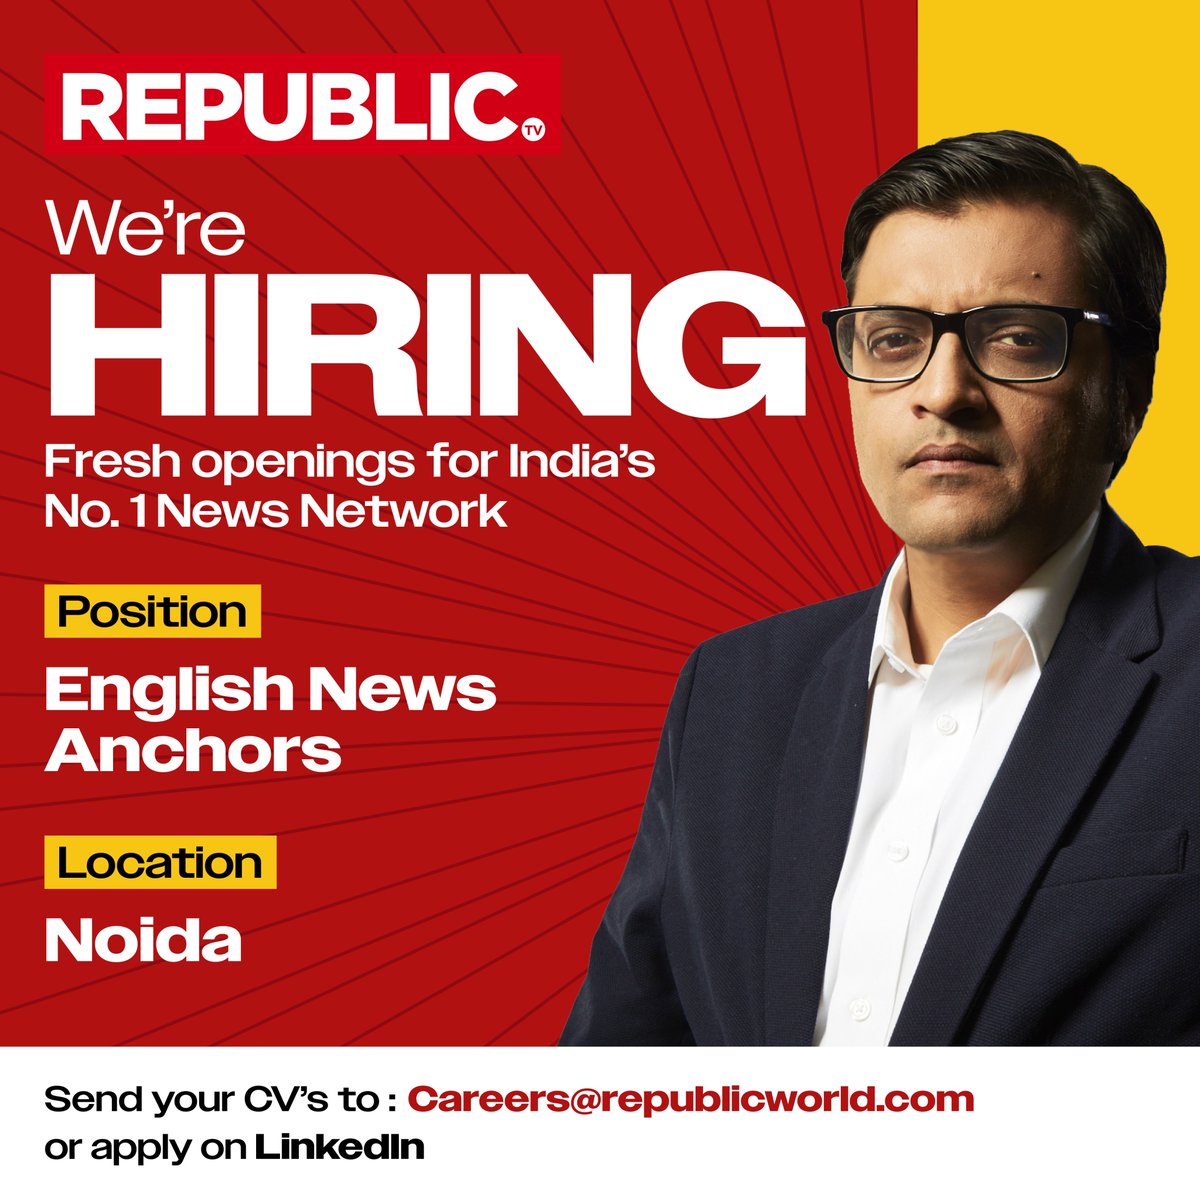 India's Number 1 news network Republic is hiring for a host of exciting positions! If you think you fit the bill, apply via LinkedIn here - linkedin.com/jobs/republic-… or email your CVs with the position in the subject line to careers@republicworld.com #Republic #Hiring #RepublicTV…